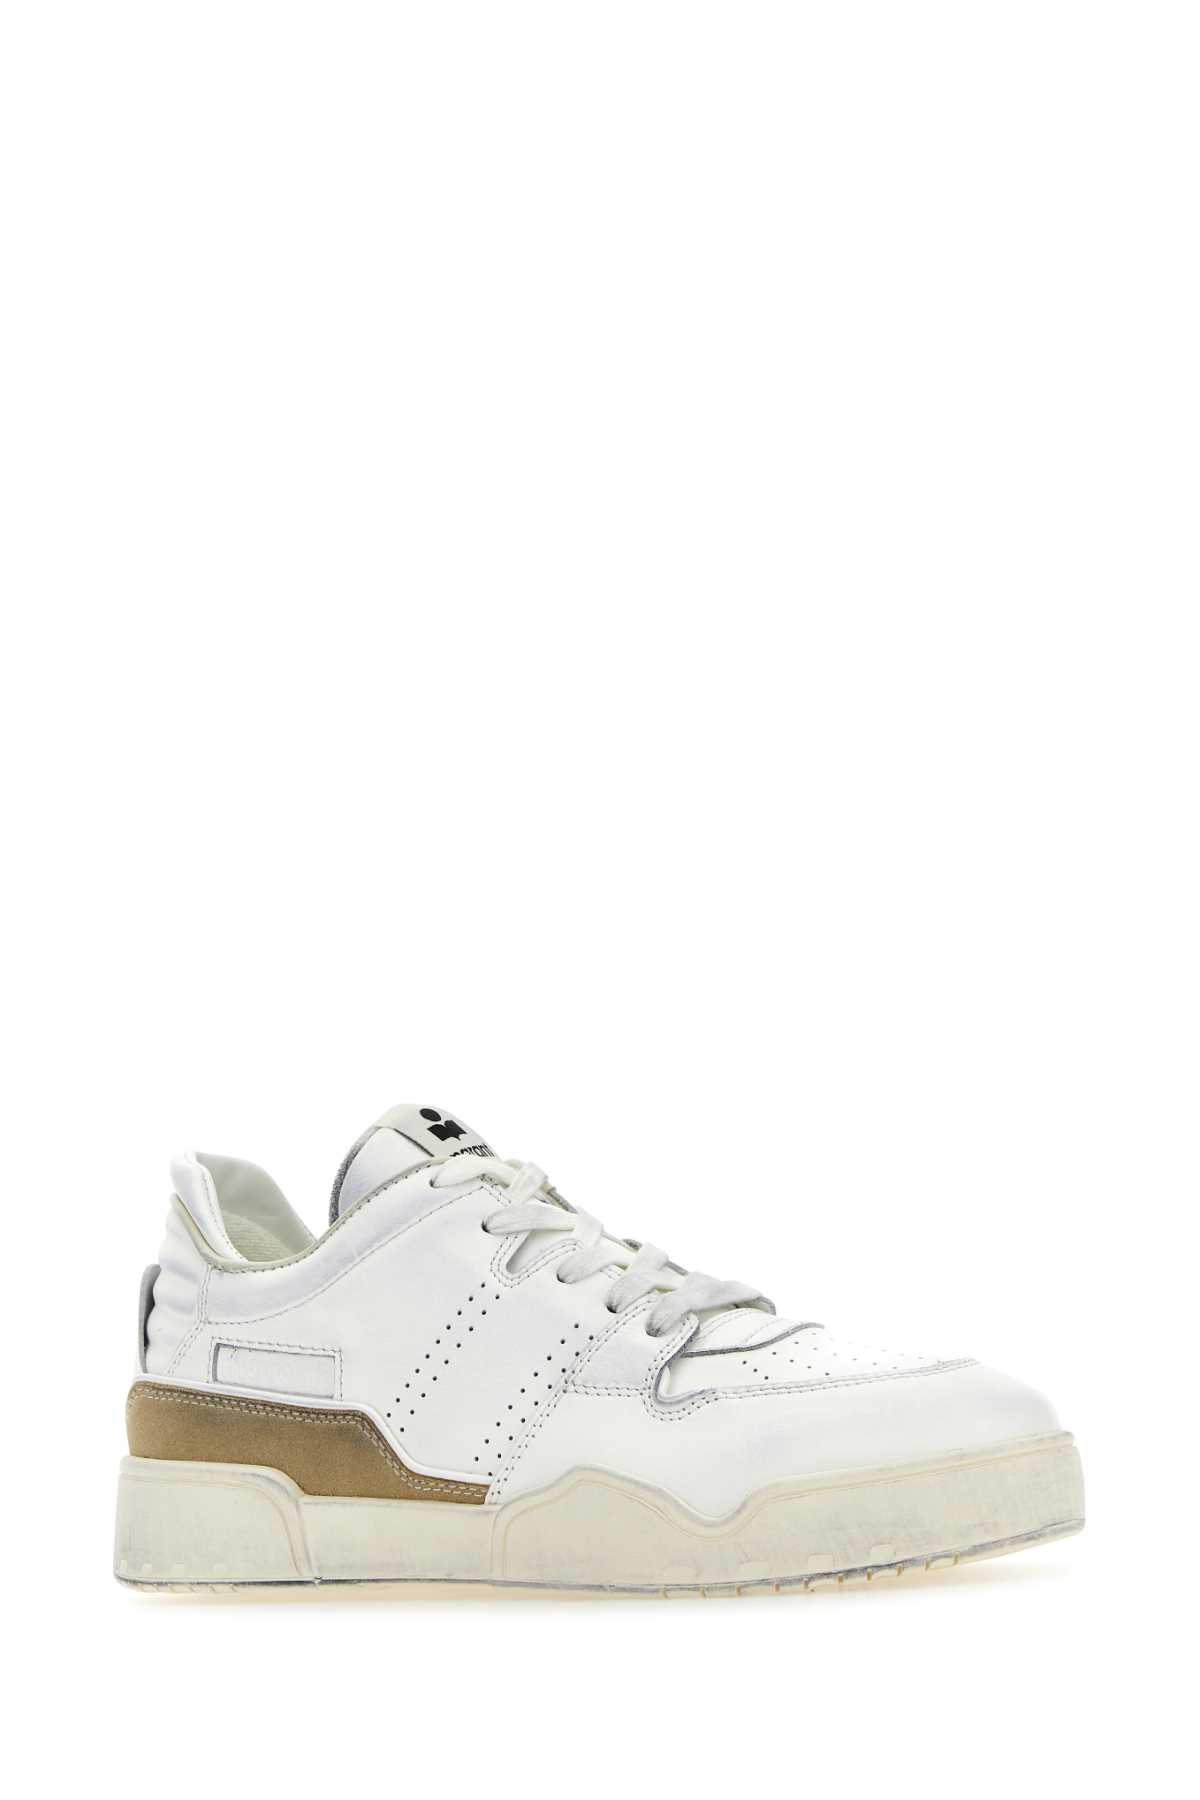 ISABEL MARANT TWO-TONE LEATHER EMREEH SNEAKERS